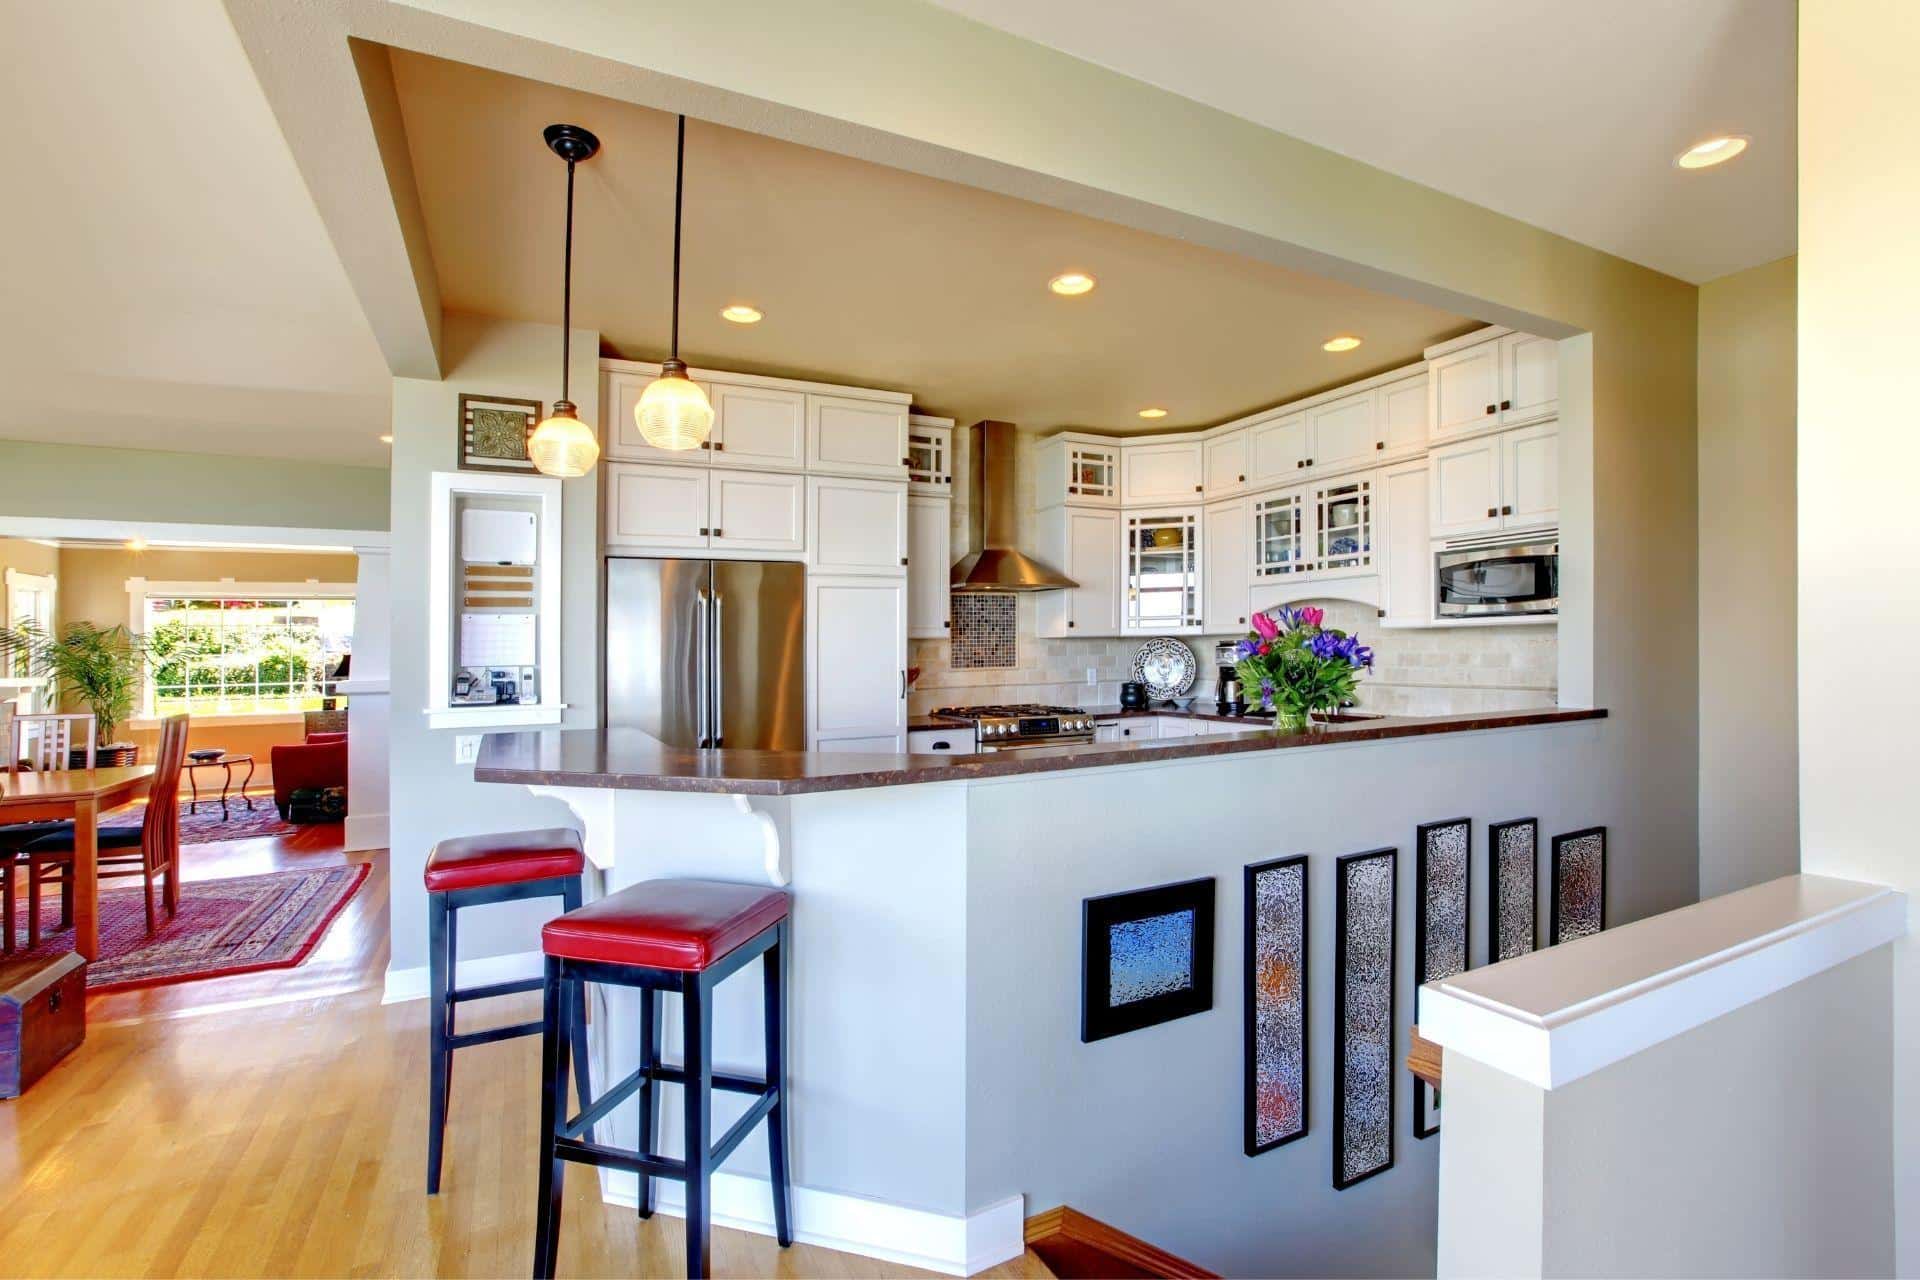 Questions to Ask Before Hiring a Remodeler Part I